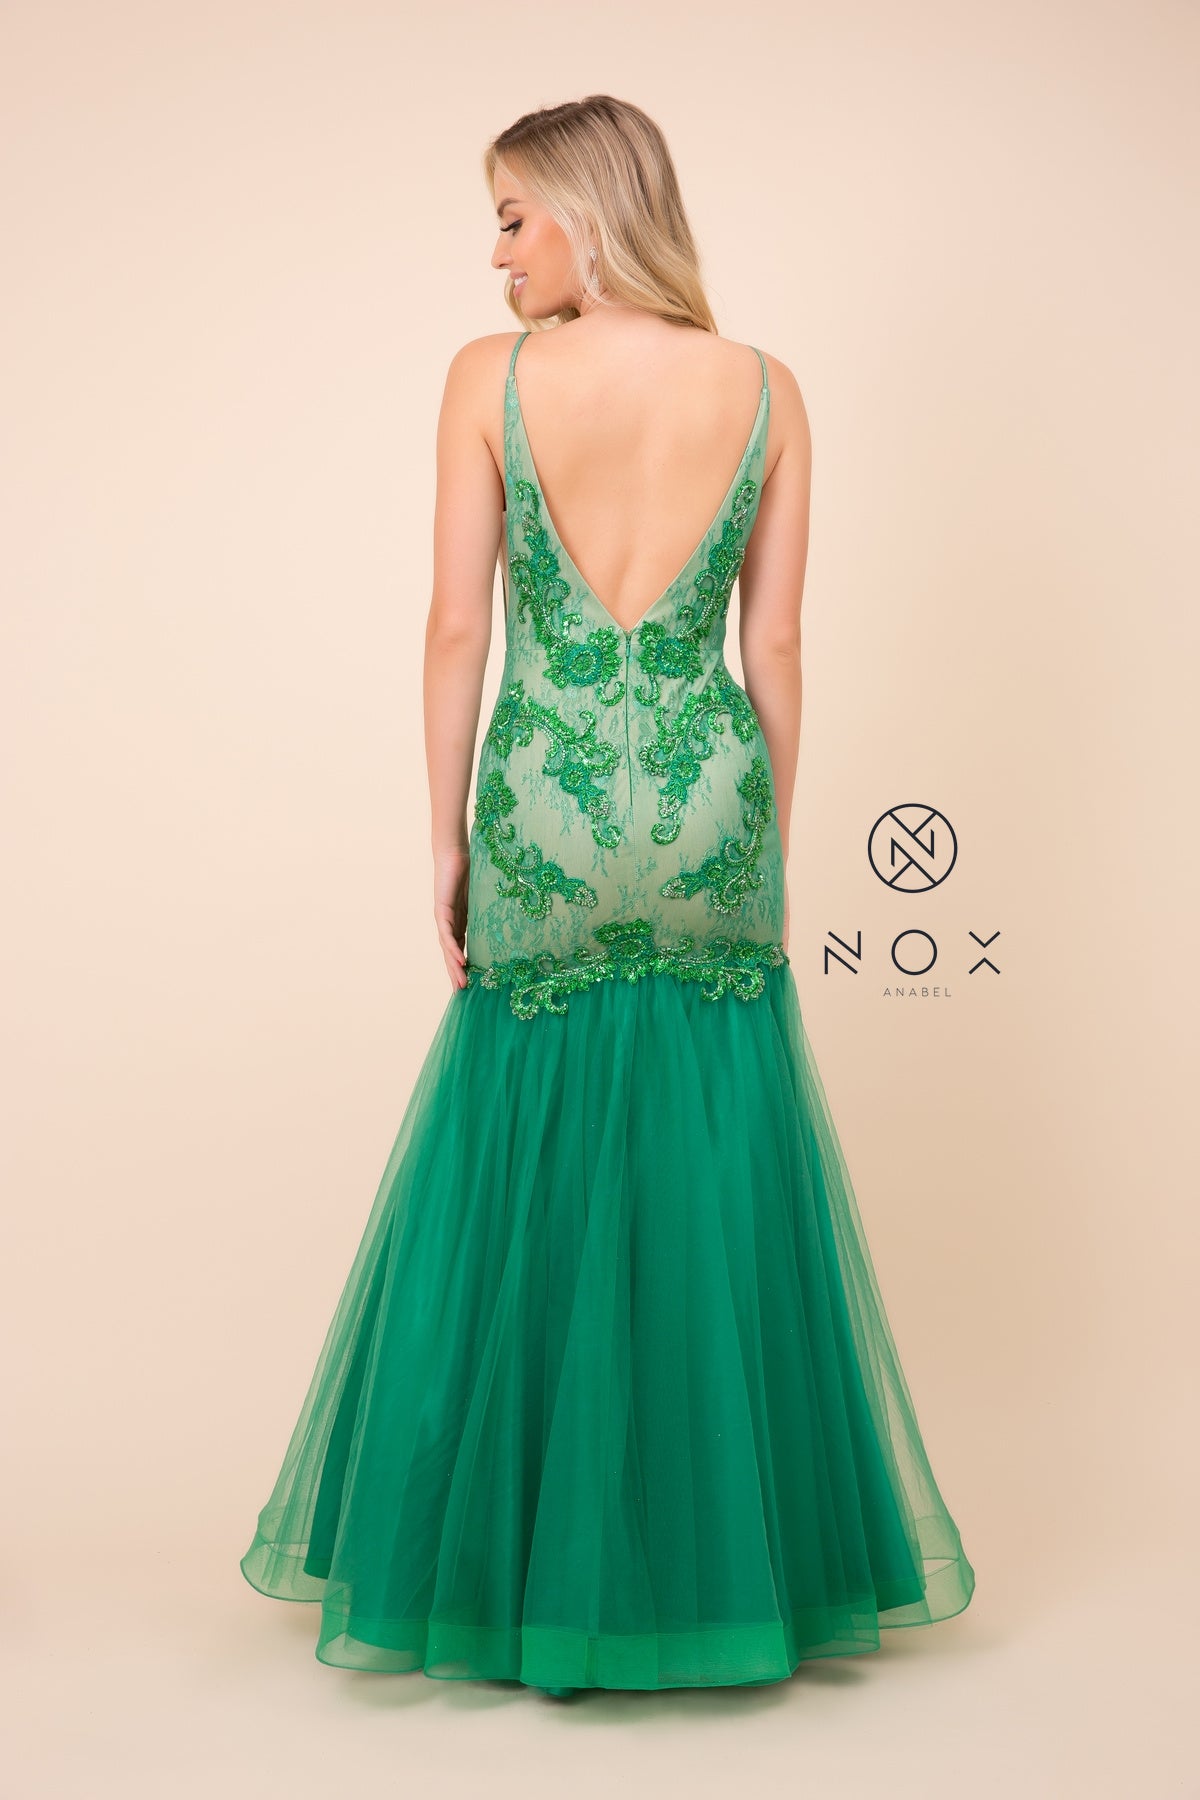 MyFashion.com - MERMAID LACE GOWN WITH SHEER SIDE CUTOUTS (E185) - Nox Anabel promdress eveningdress fashion partydress weddingdress 
 gown homecoming promgown weddinggown 